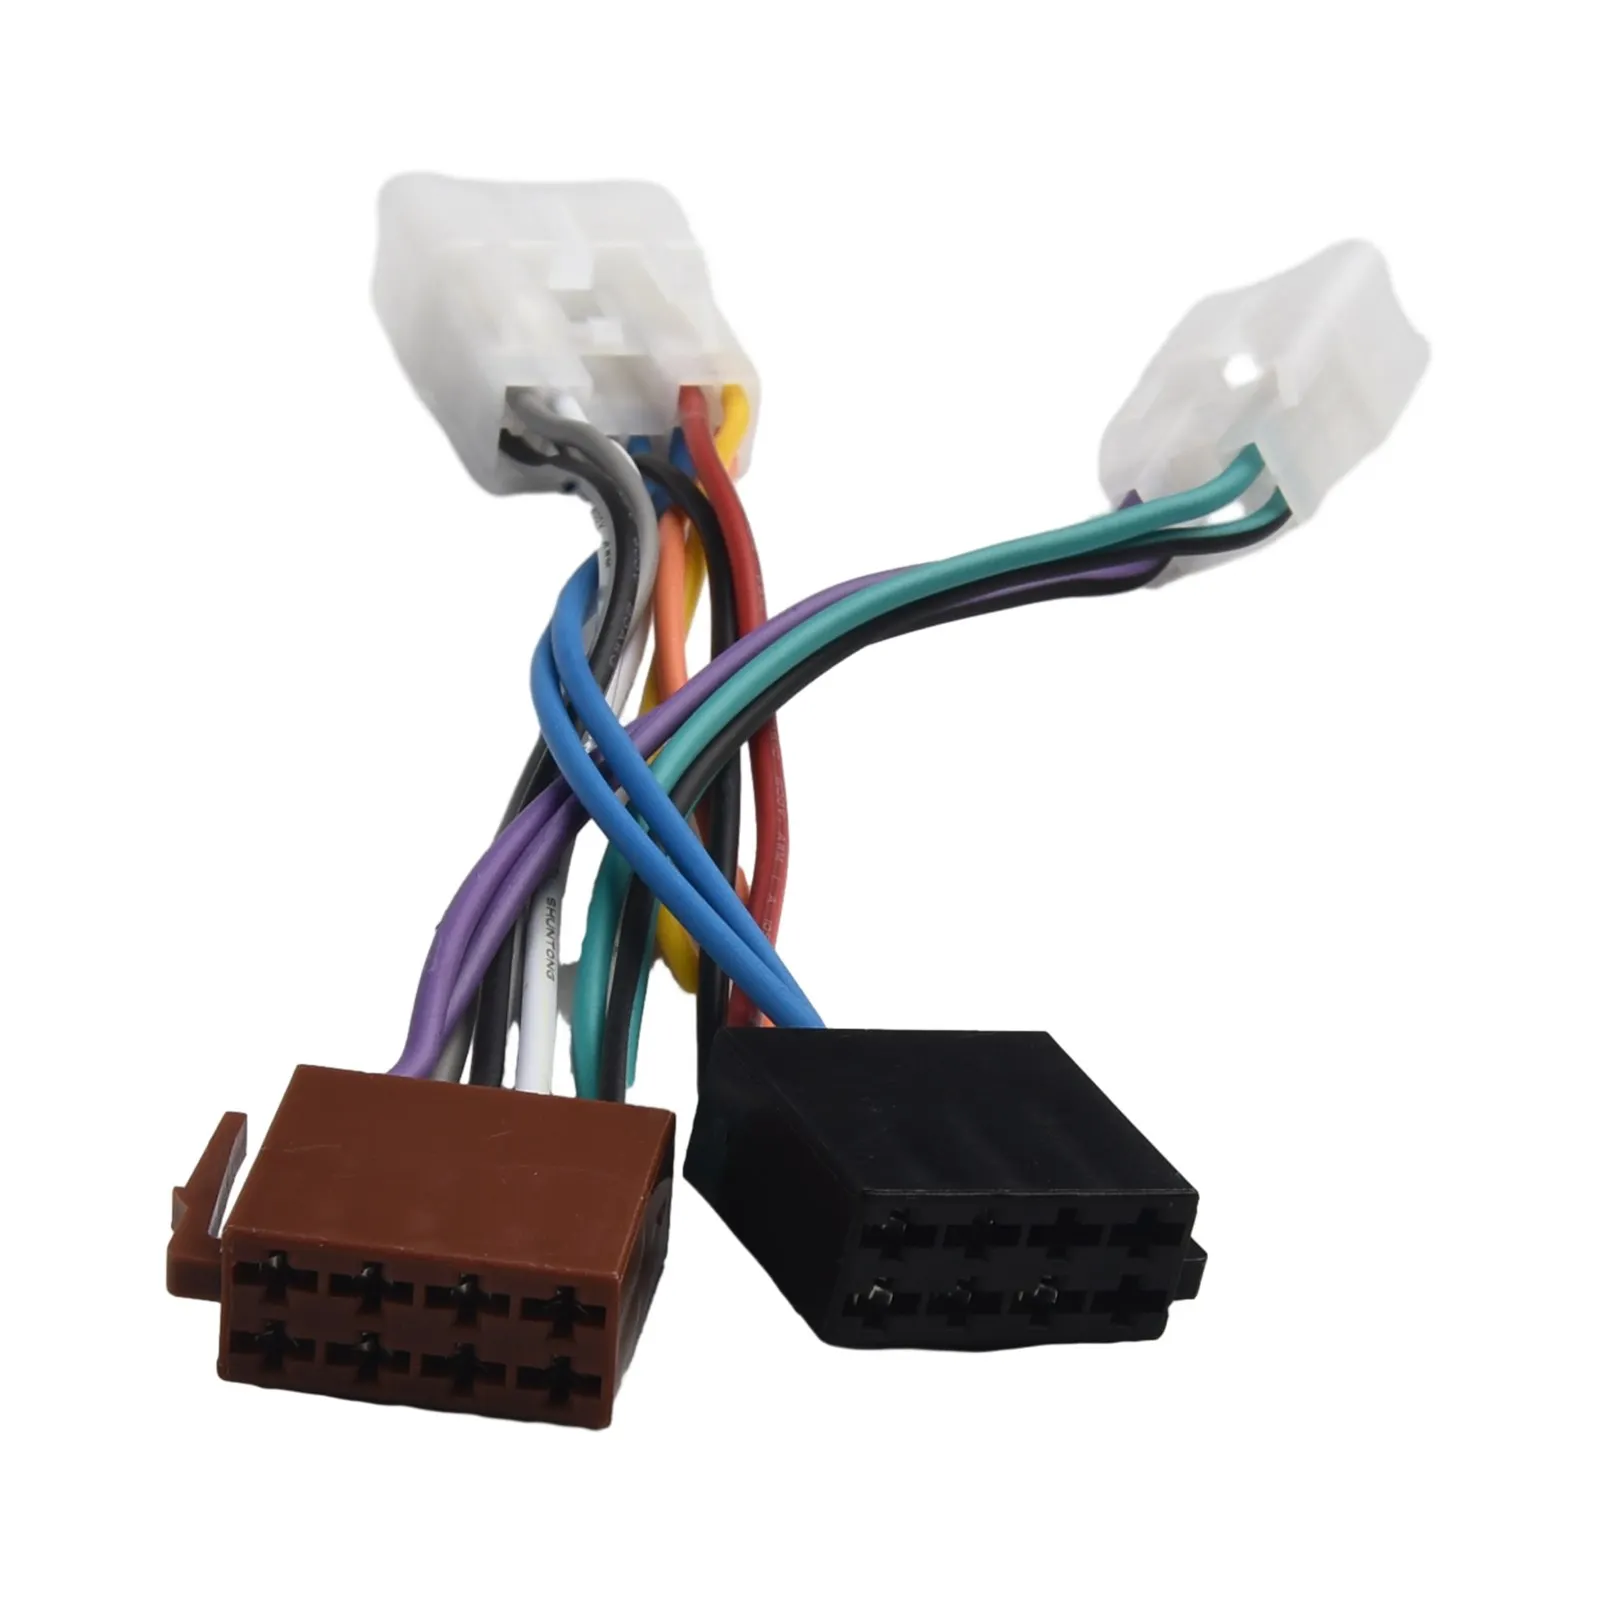 

Car ISO Radio Stereo Wiring Made Of High-quality Materials, Anti-corrosion, Wear-resistant, And Non-deformation